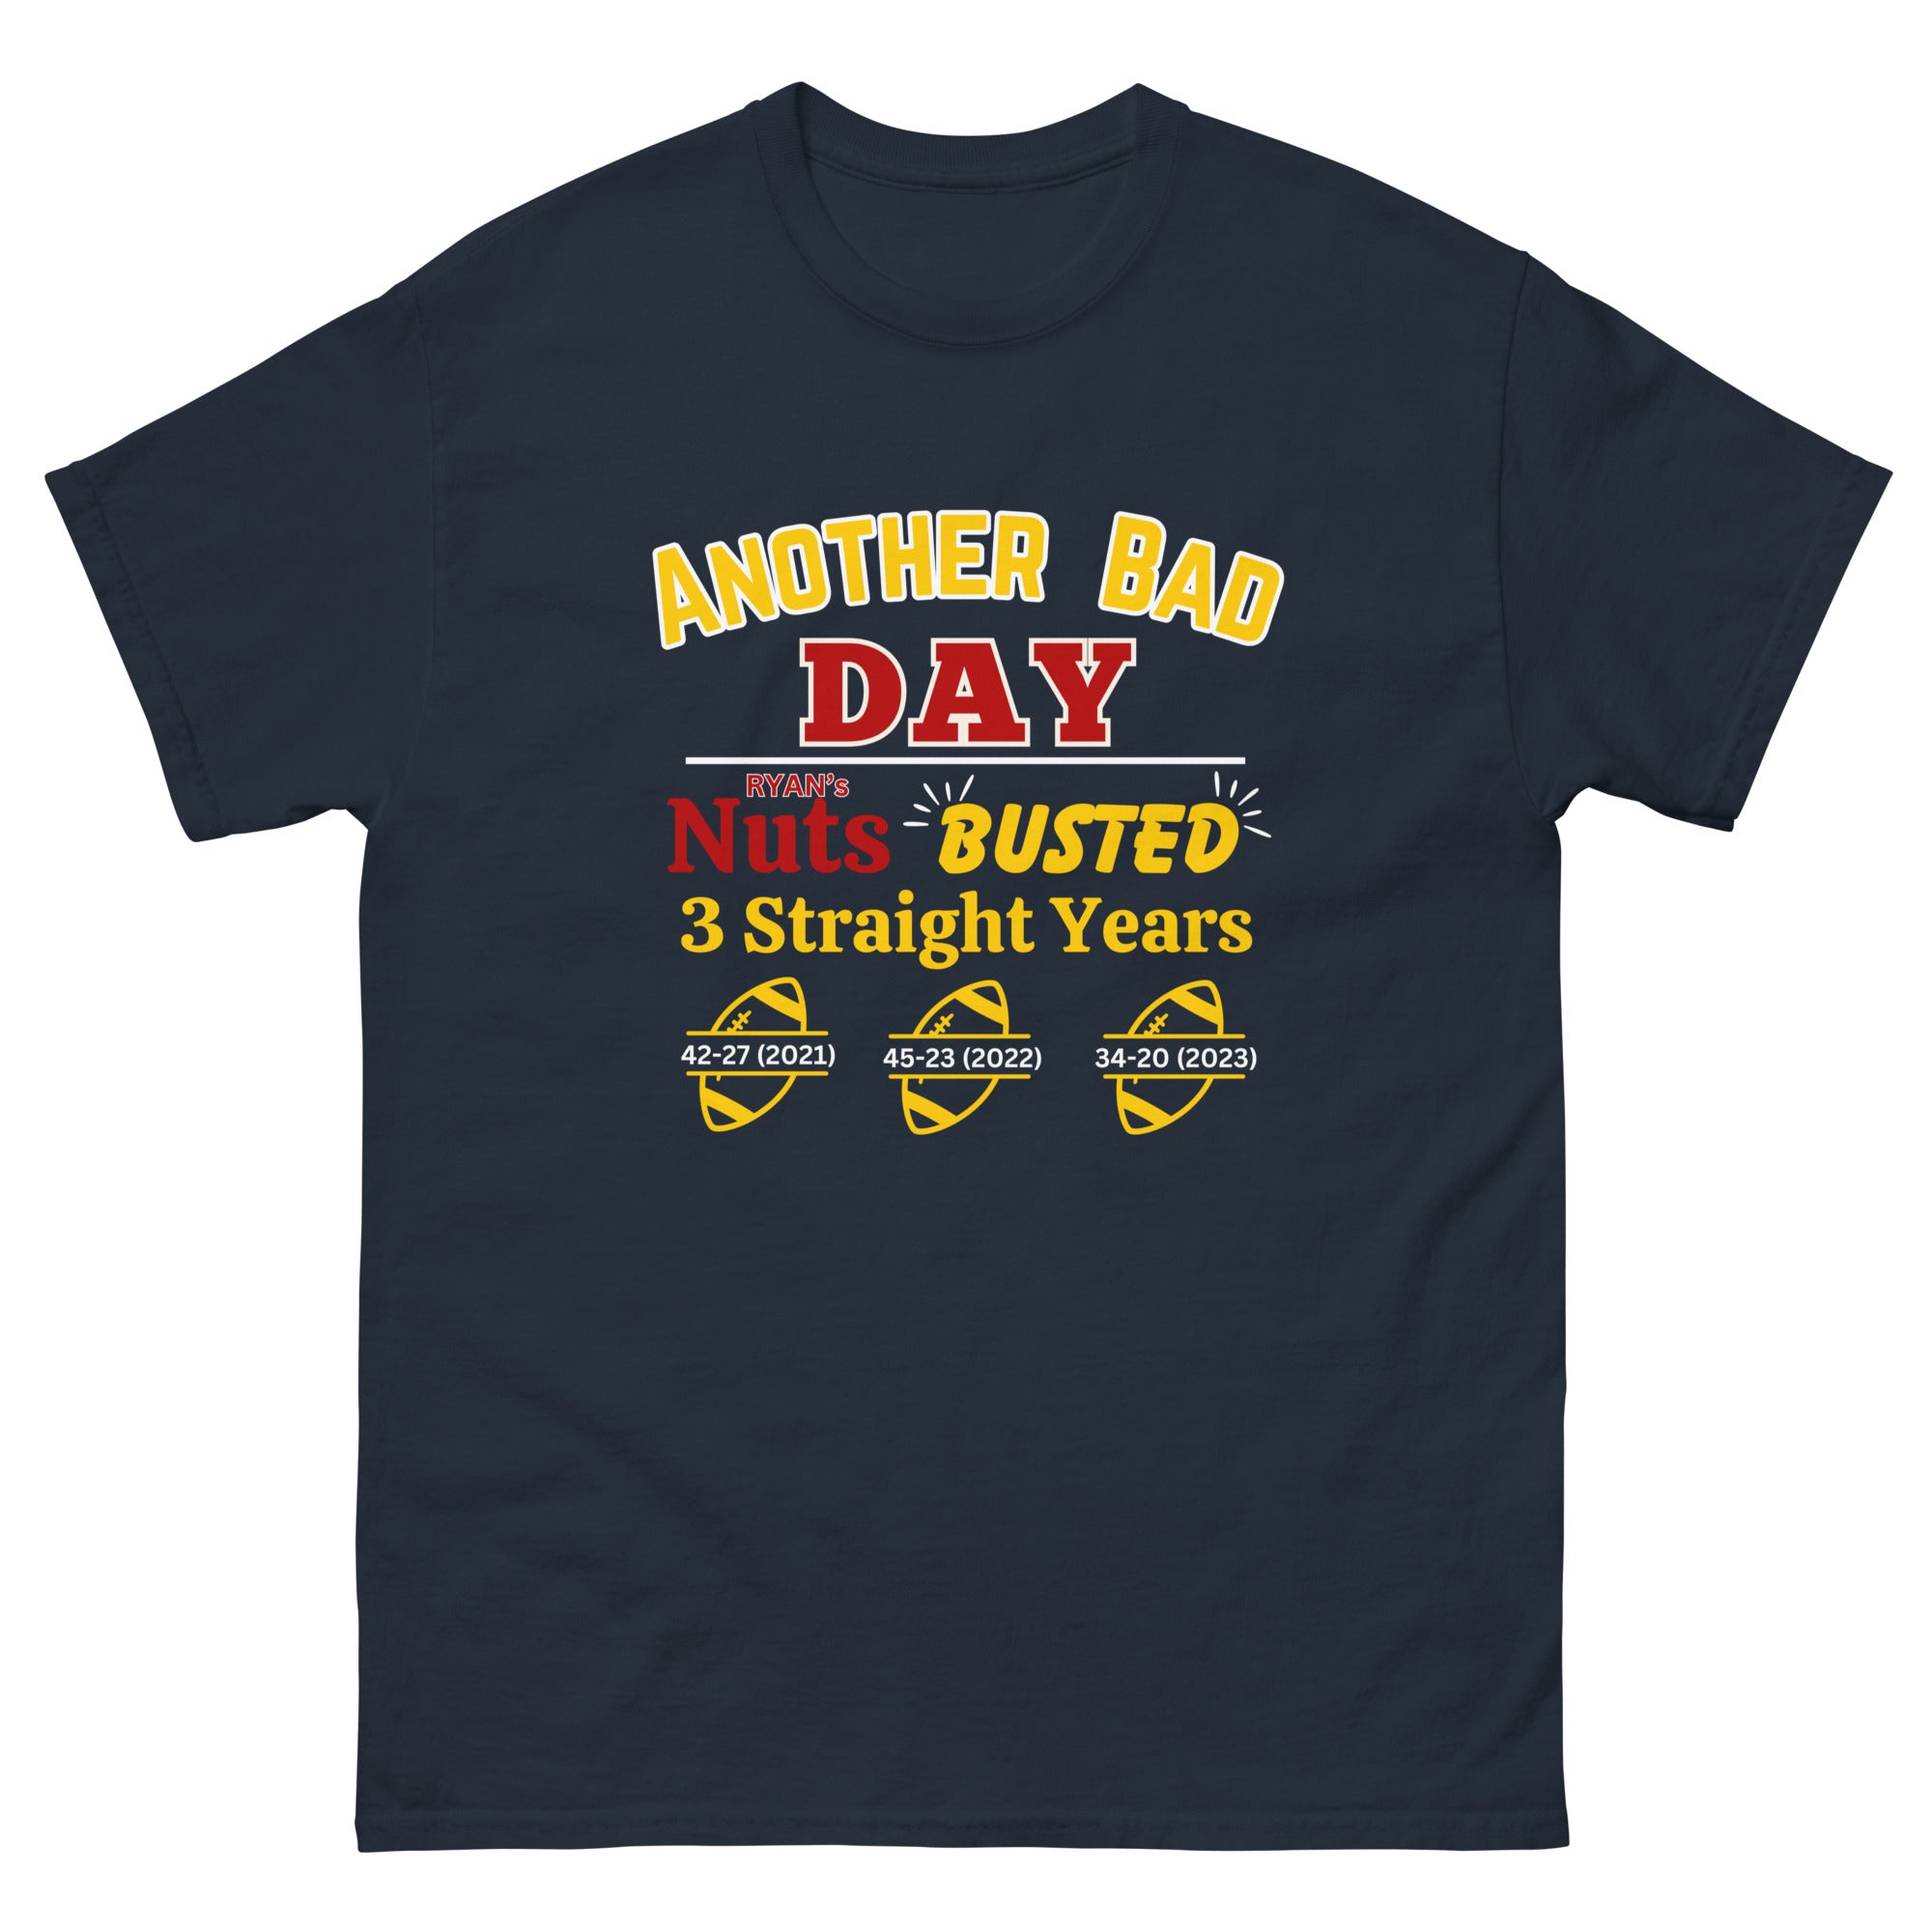 Michigan Football Fans Ryan's Nuts Busted 2023 Score T-Shirt